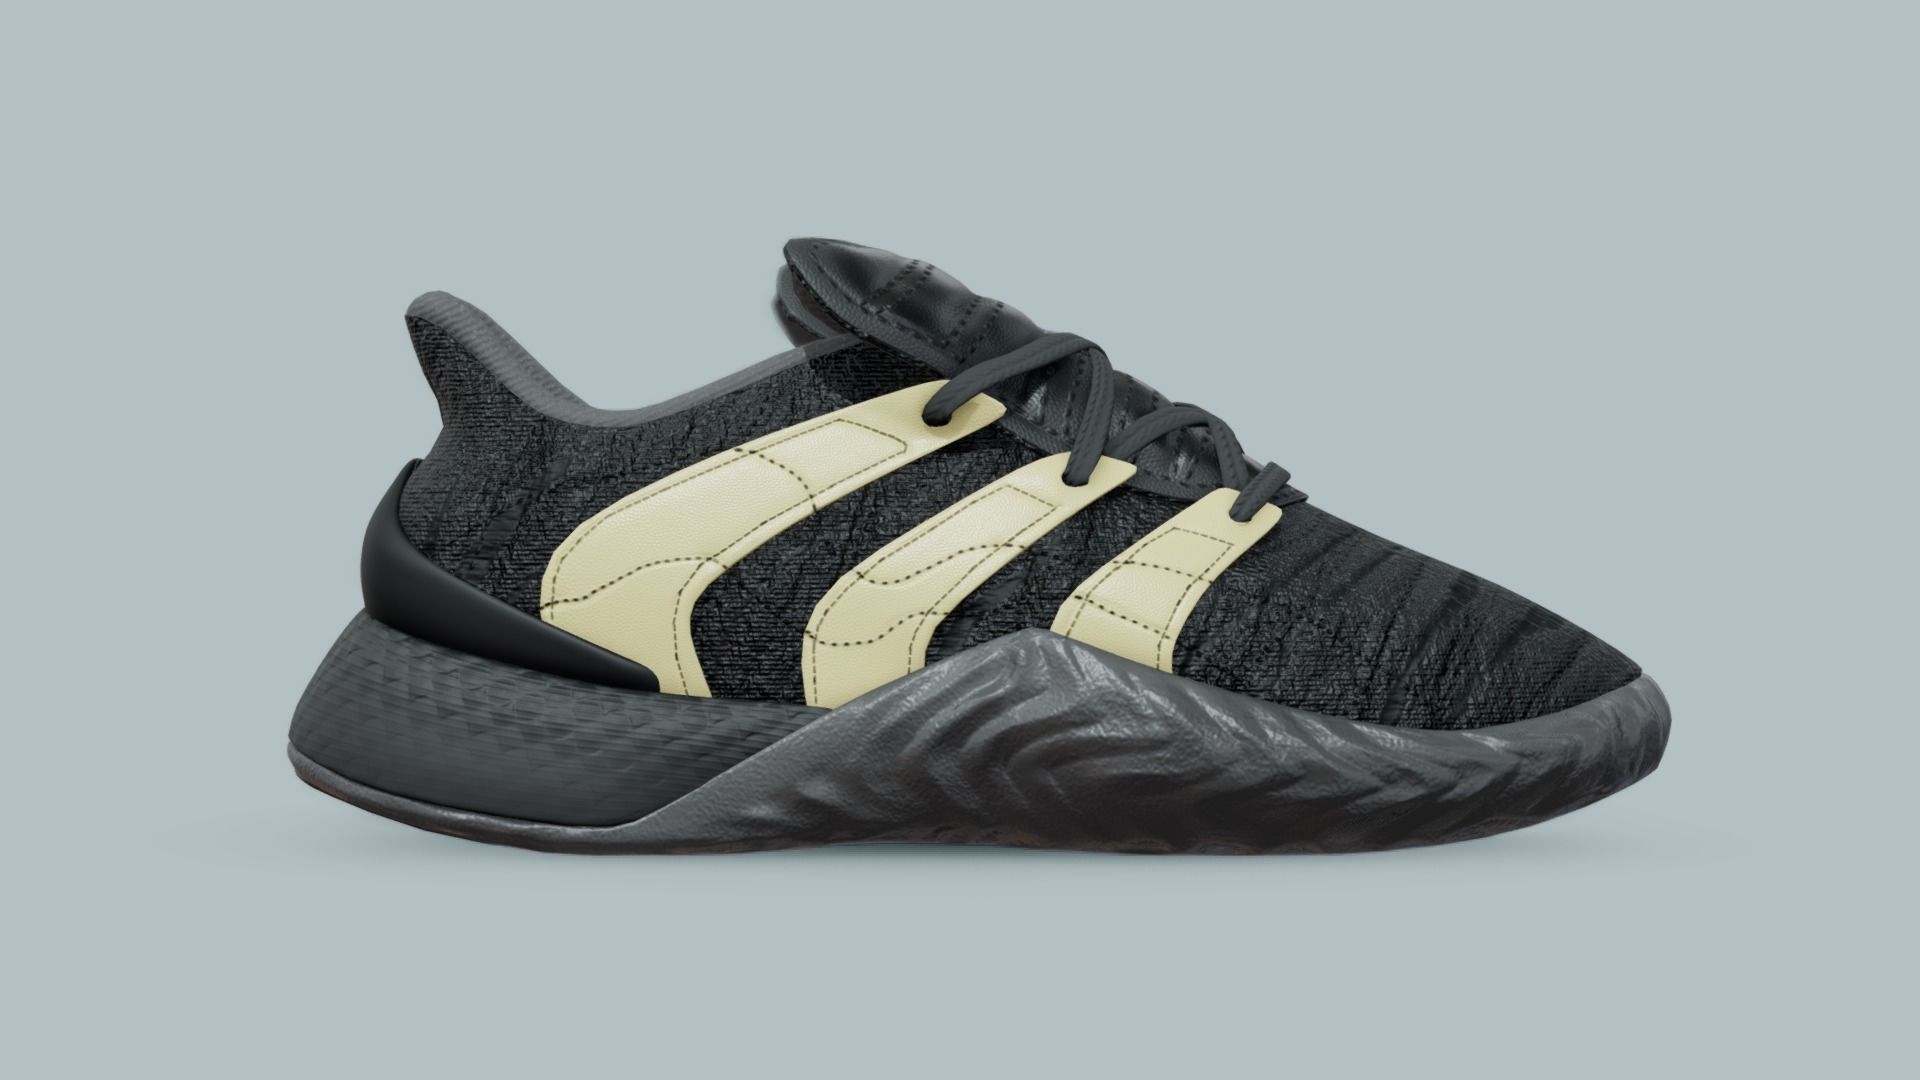 3D model Adidas Sobakov 2.0 Originals Black - This is a 3D model of the Adidas Sobakov 2.0 Originals Black. The 3D model is about a black and white shoe.